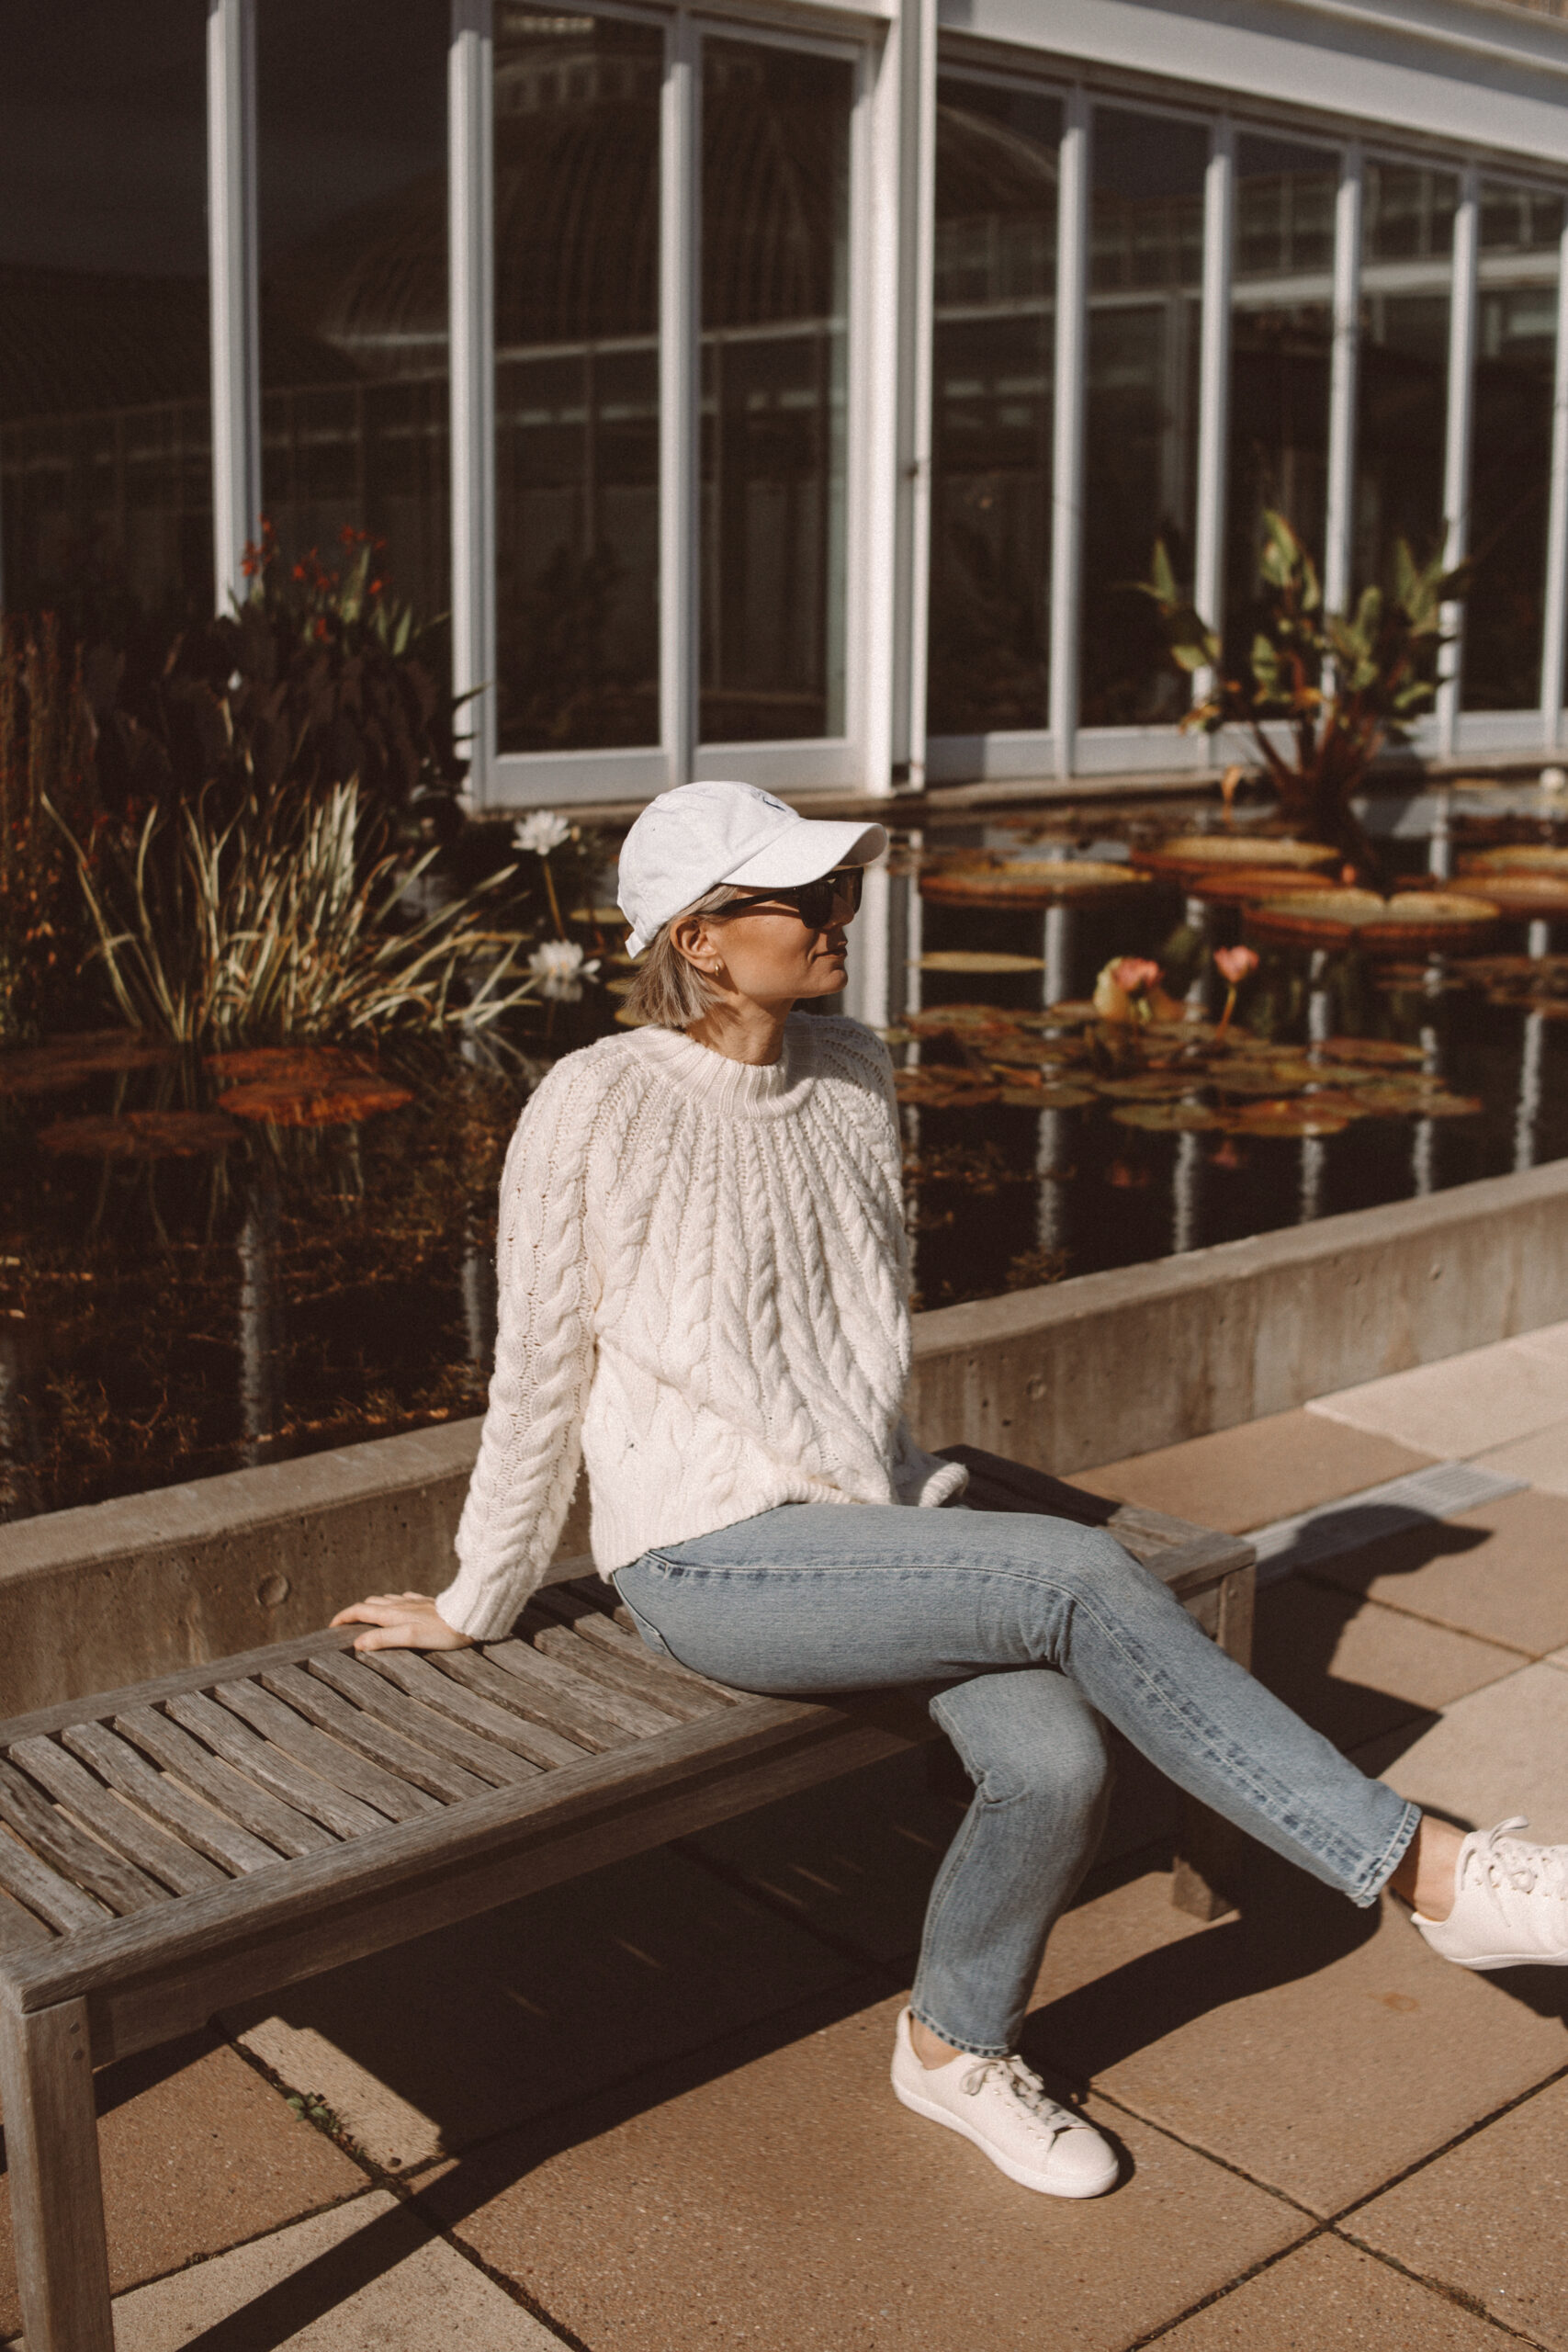 Karin Emily wears a cable knit sweater from Sezane with light wash straight leg jeans, cream sneakers, and a Ralph Lauren baseball hat